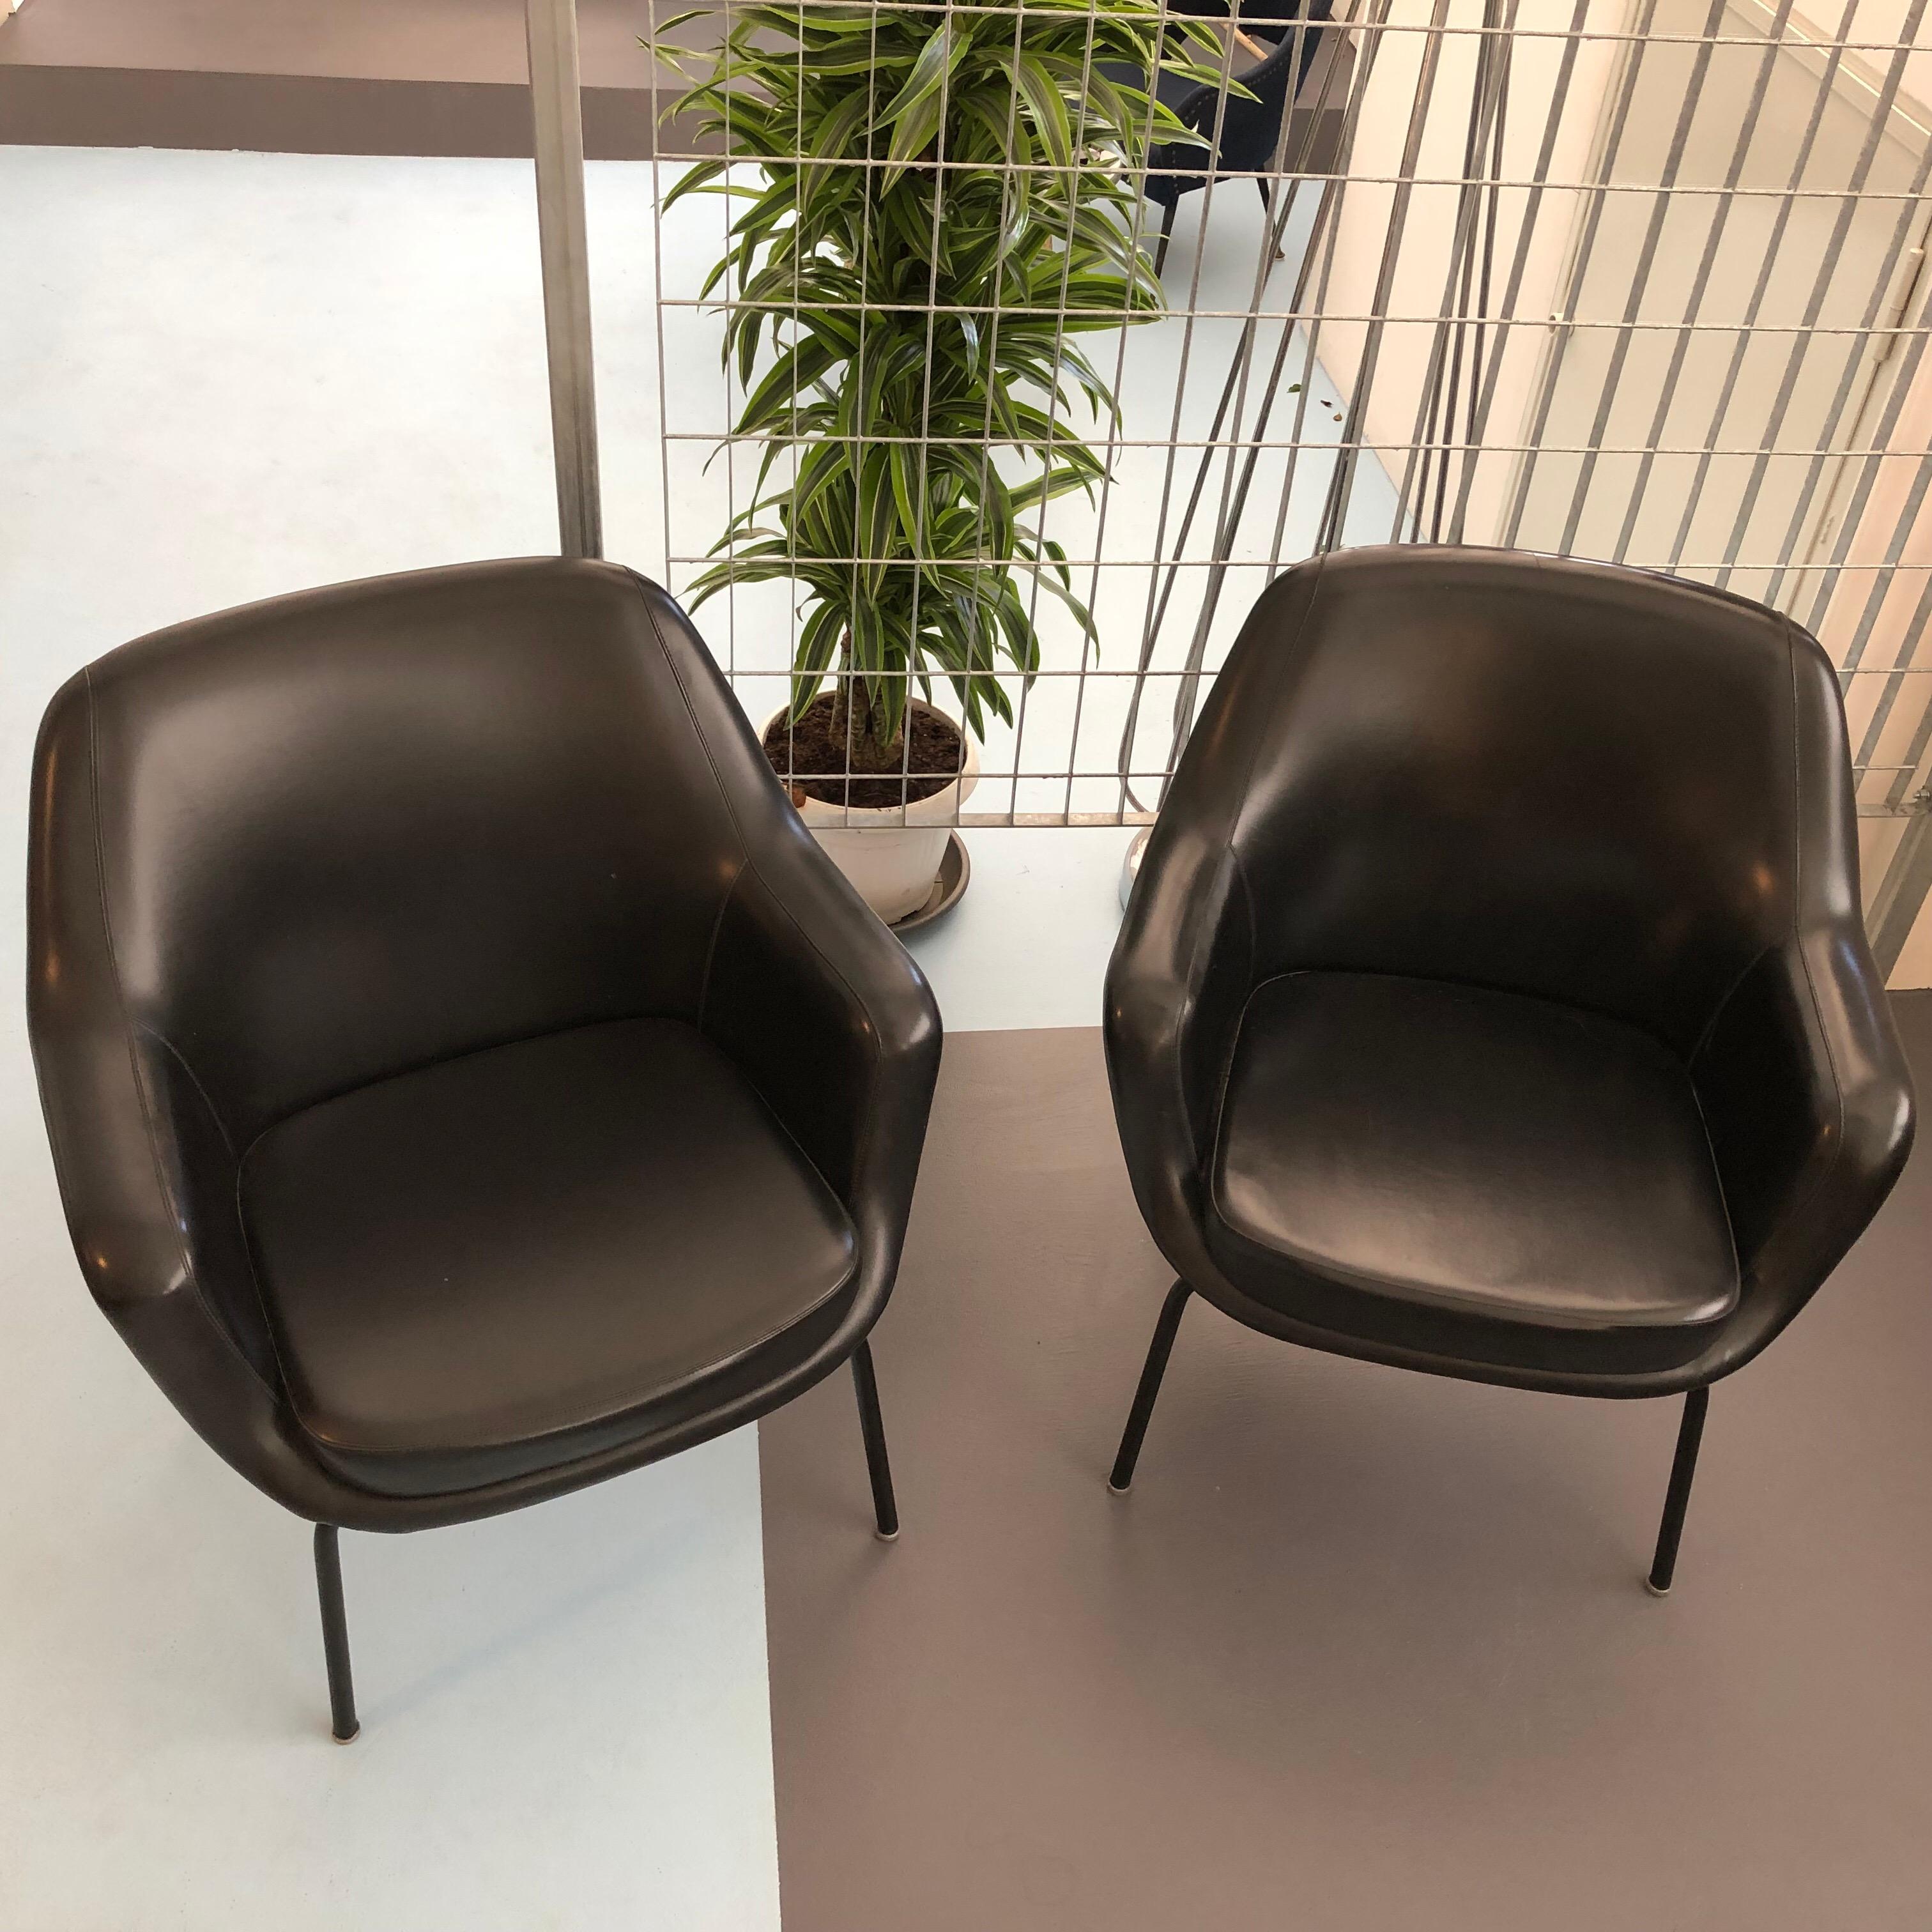 Pair of Olli Mannermaa Armchairs by Cassina, Italy, 1960s For Sale 1